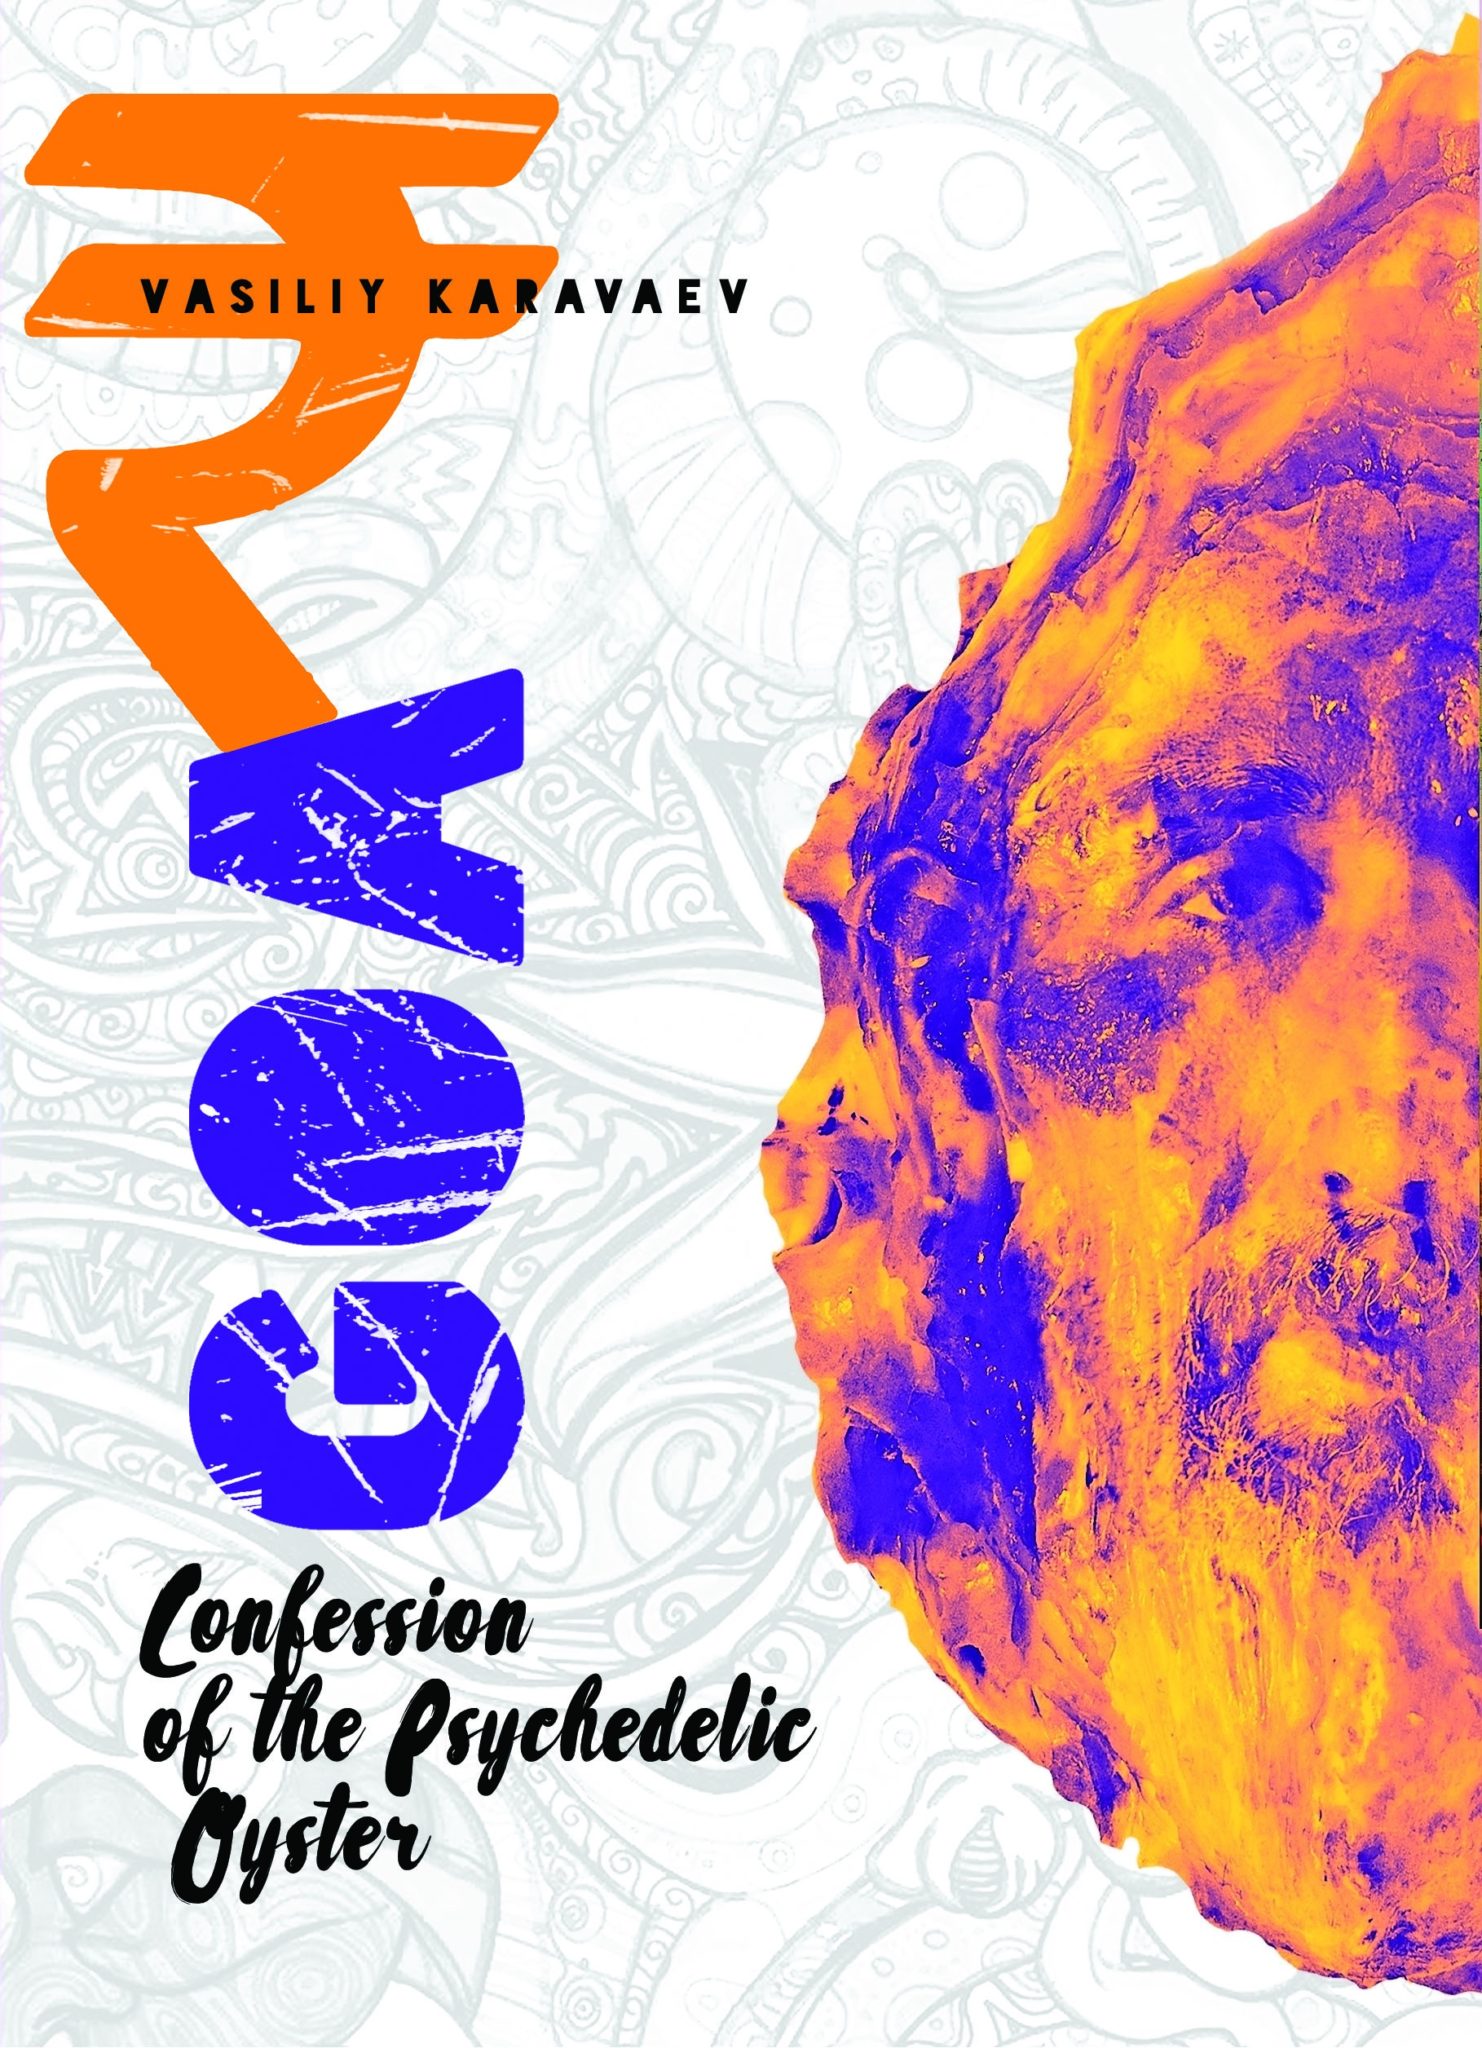 FREE: Goa. Confession of the Psychedelic Oyster by Vasailiy Karavaev